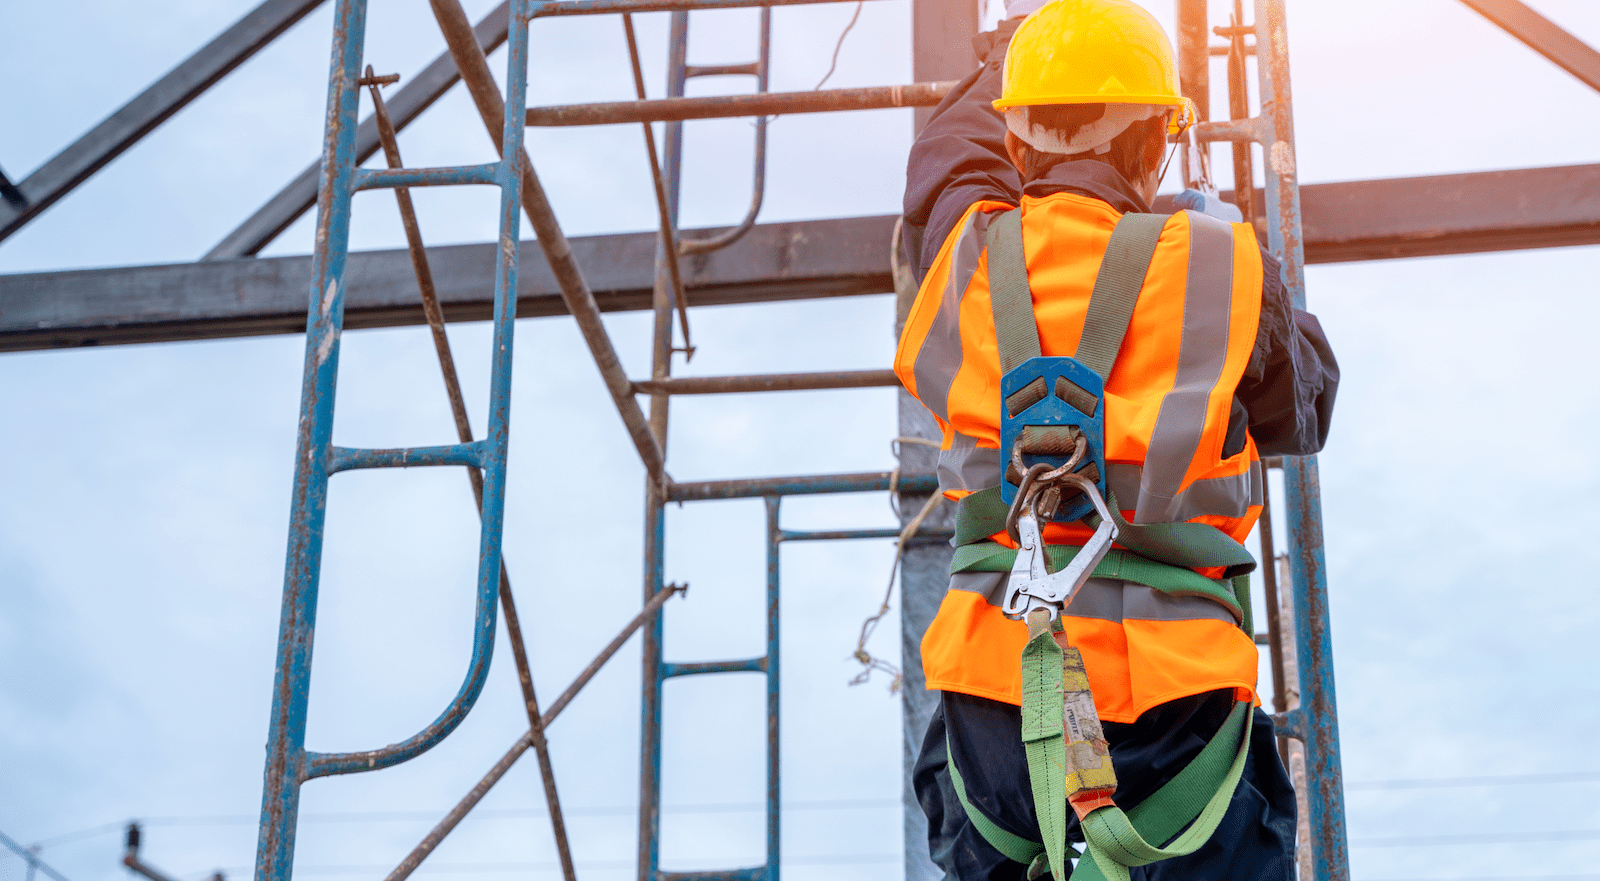 Construction worker wearing safety harness on ladder to comply with OSHA regulations